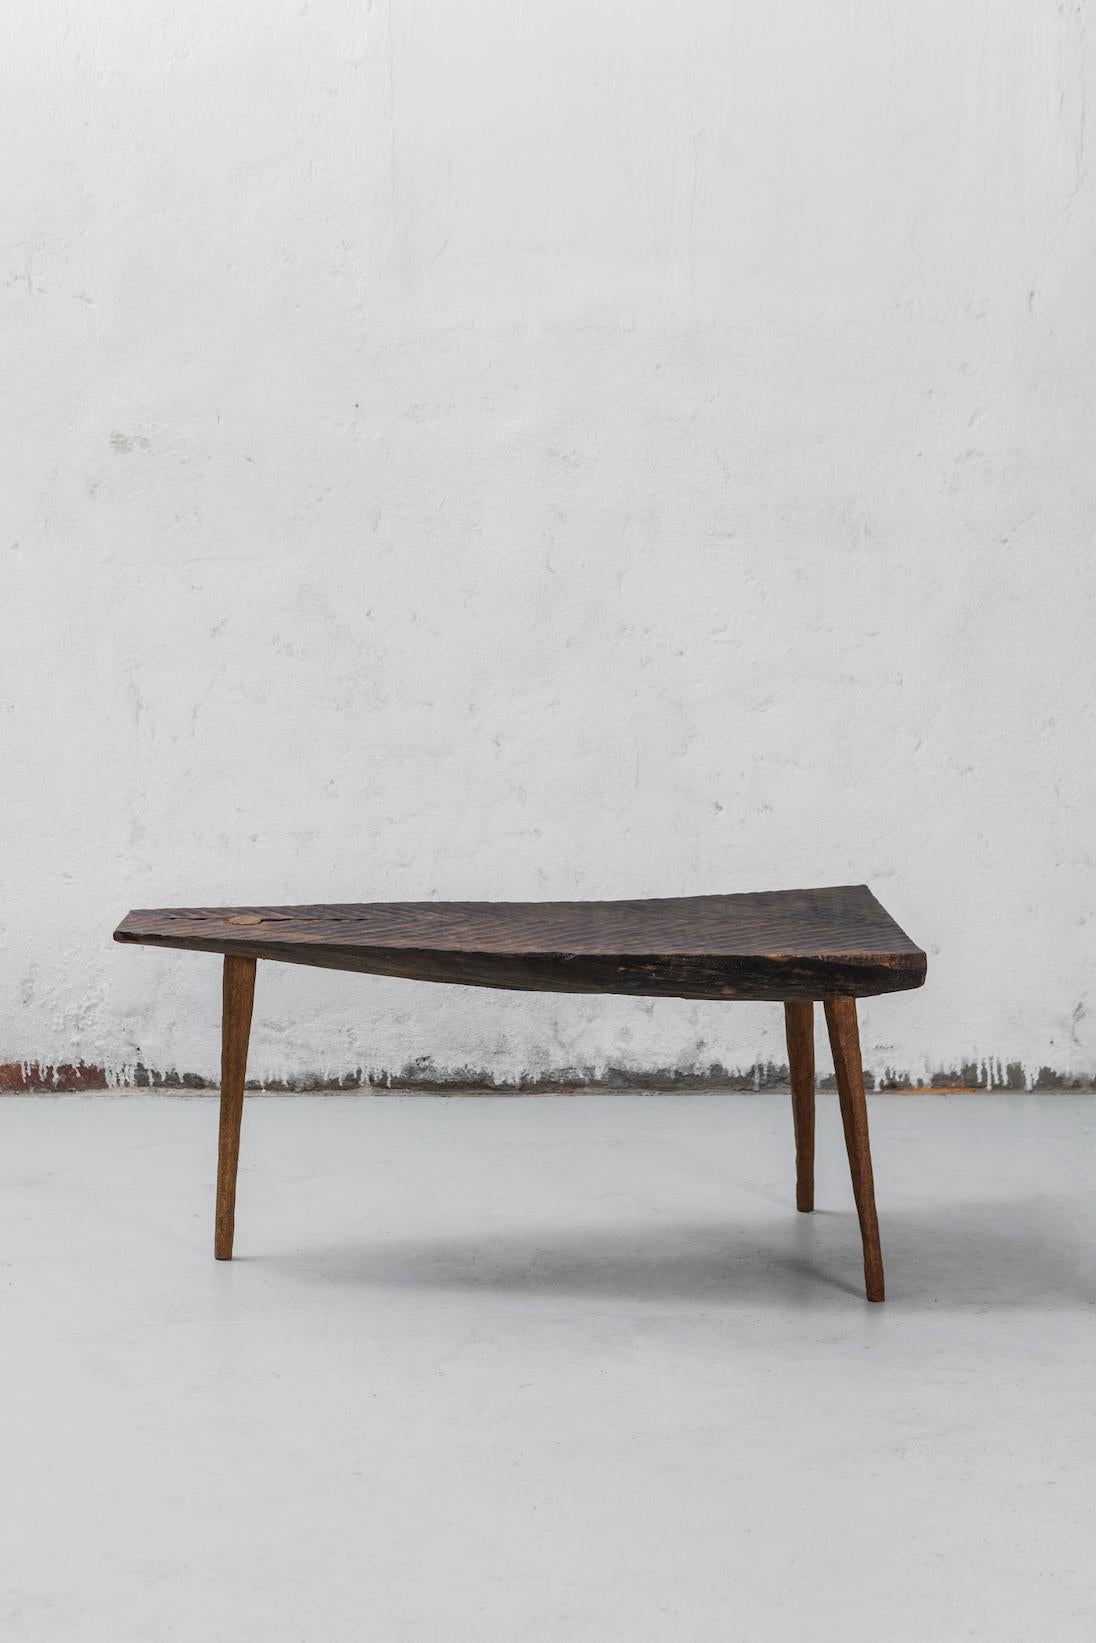 Russian Contemporary Brutalist Style Small Table #3 in Solid Oak and Linseed Oil For Sale